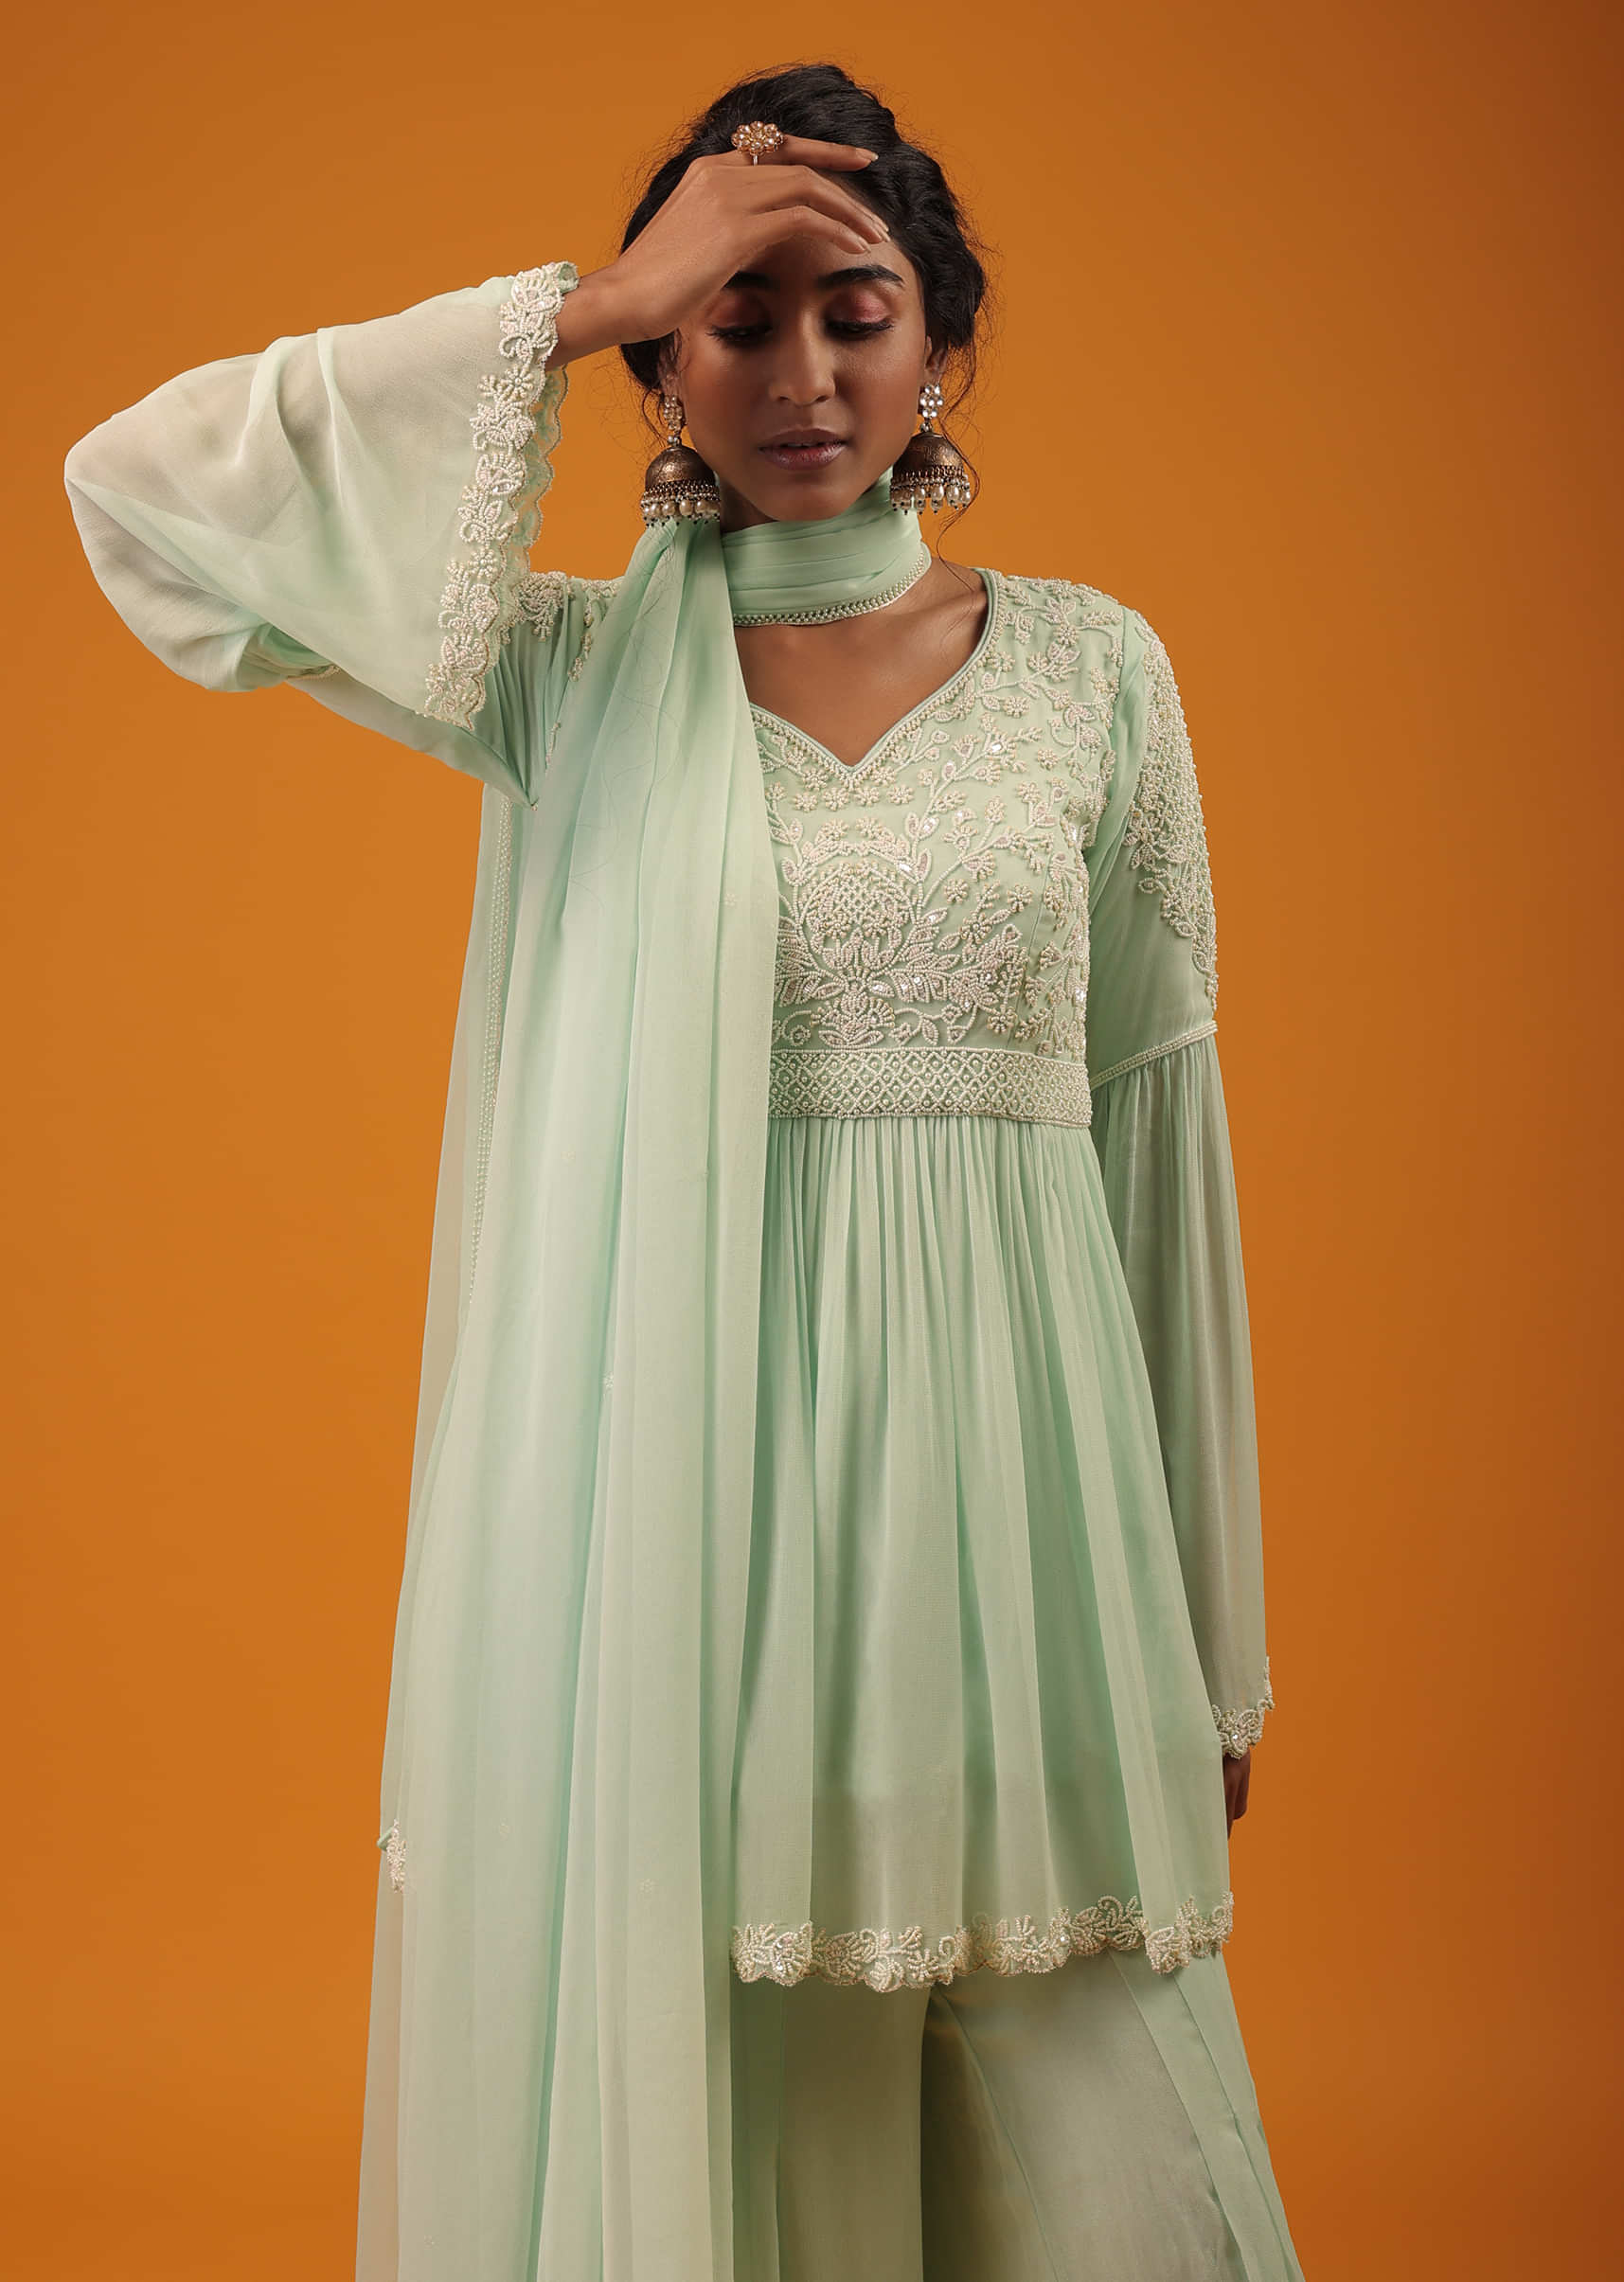 Honey Dew Green Peplum Palazzo Suit In Georgette With Intricate Moti Work And Bell Sleeves